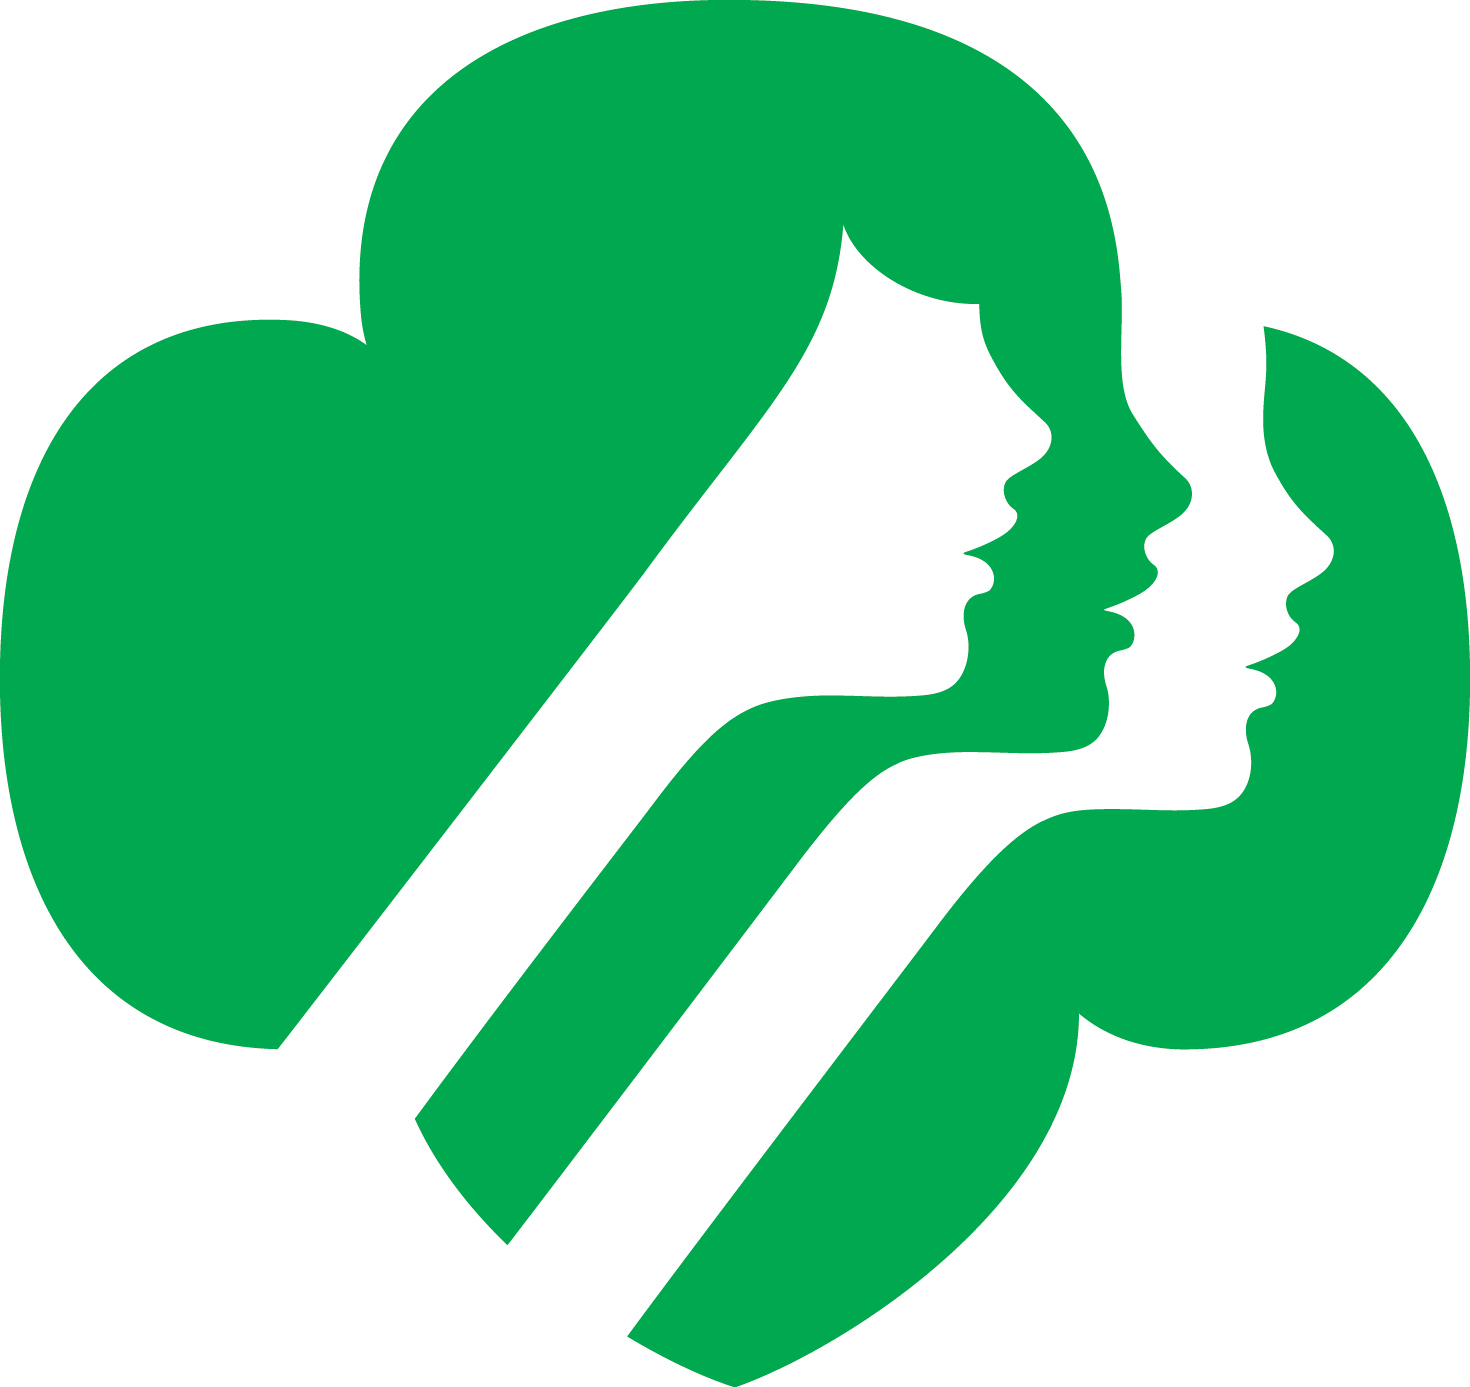 21 Girl Scouts Logo Clip Art Free Cliparts That You Can Download To